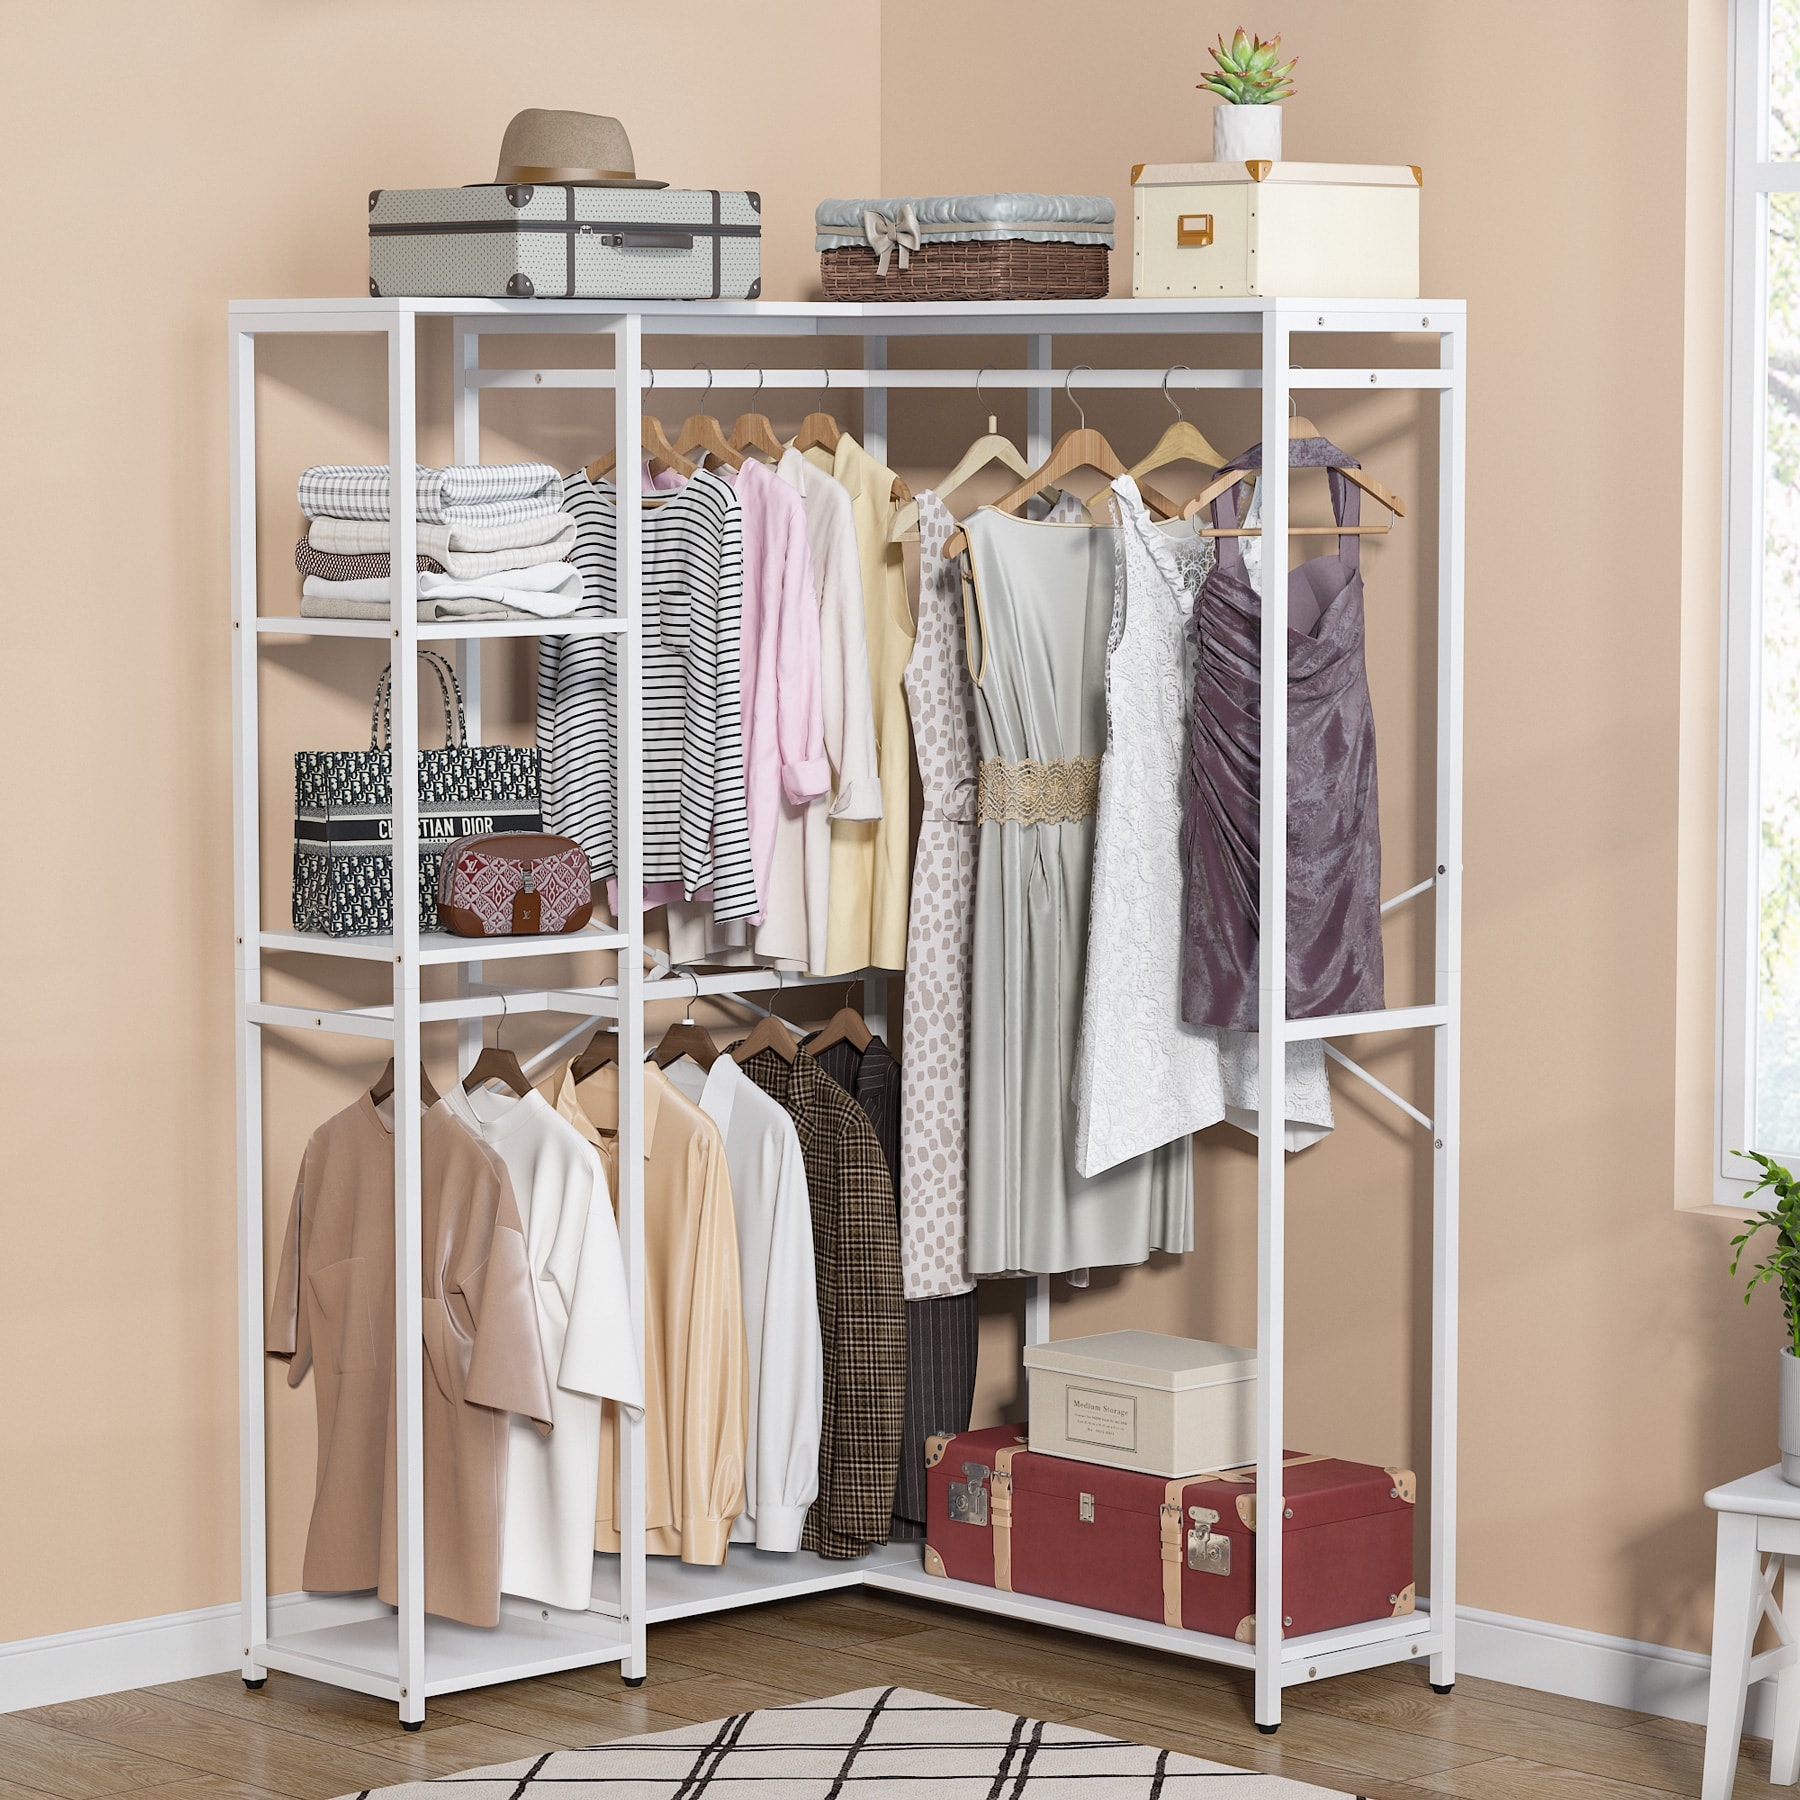 https://ak1.ostkcdn.com/images/products/is/images/direct/b83b9d255d73d94bfd87ee7618193e142b3e89e9/Heavy-Duty-Clothes-Rack-Corner-Freestanding-Closet-Organizer-with-Storage-Shelves-and-4-Hanging-Rods.jpg